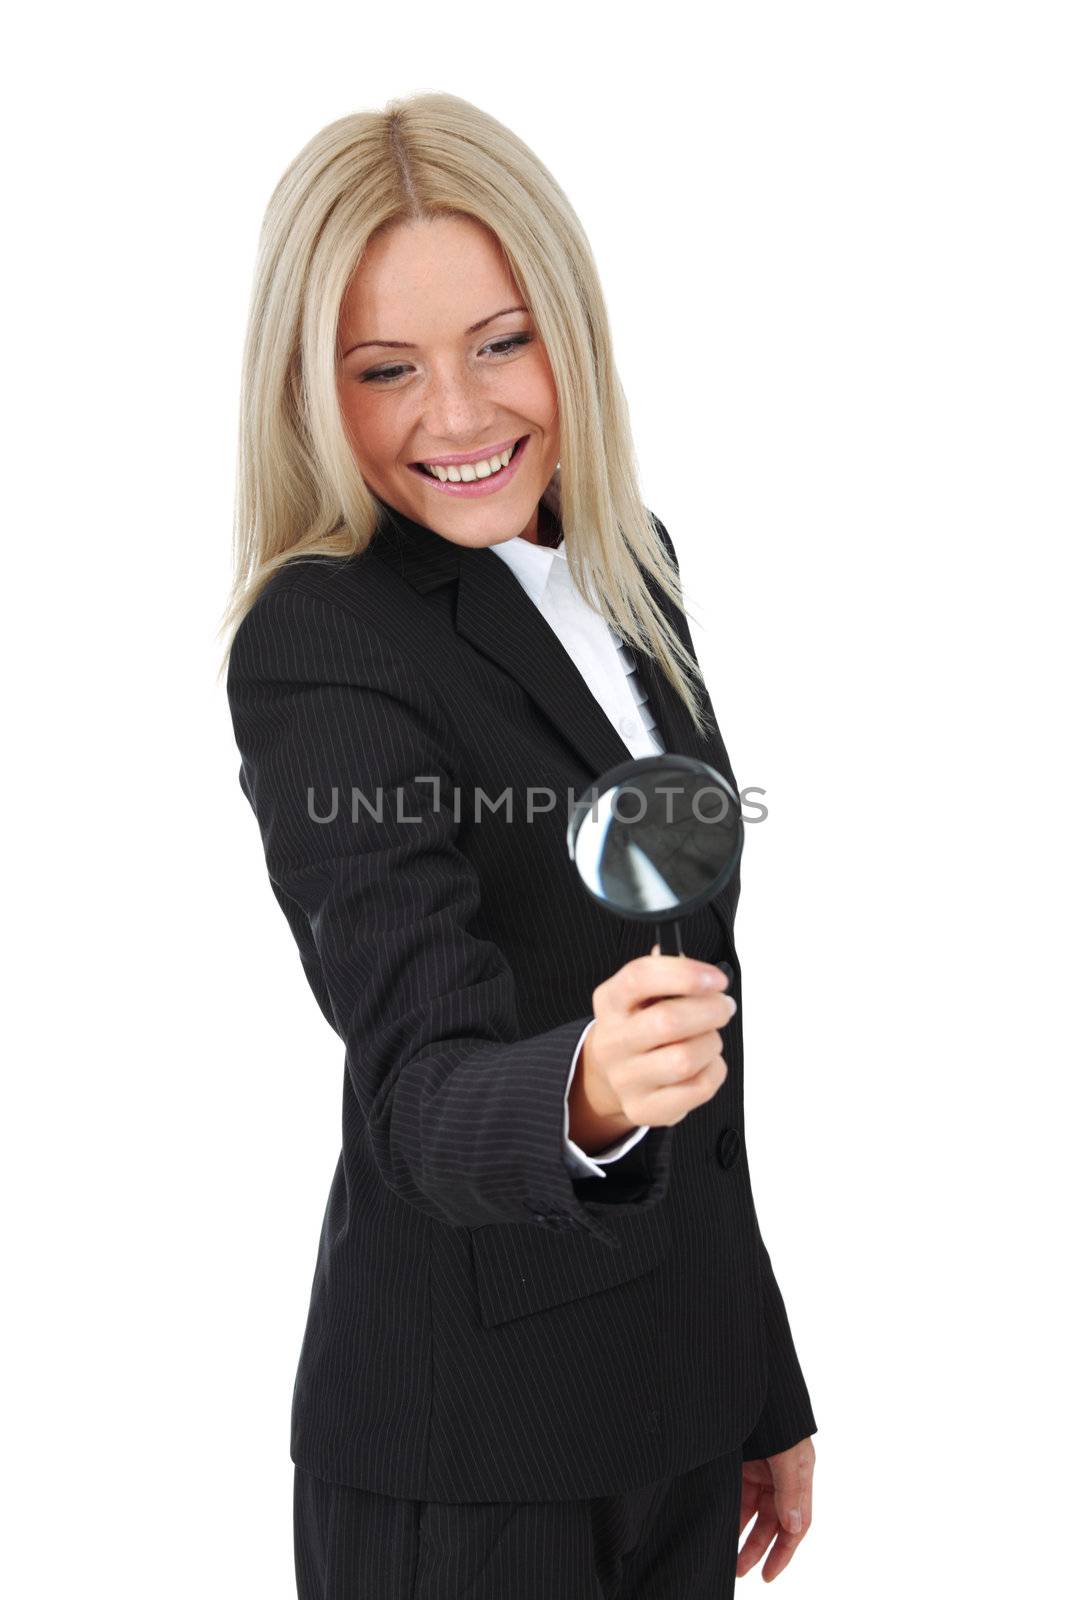 business woman search portrait isolated close up